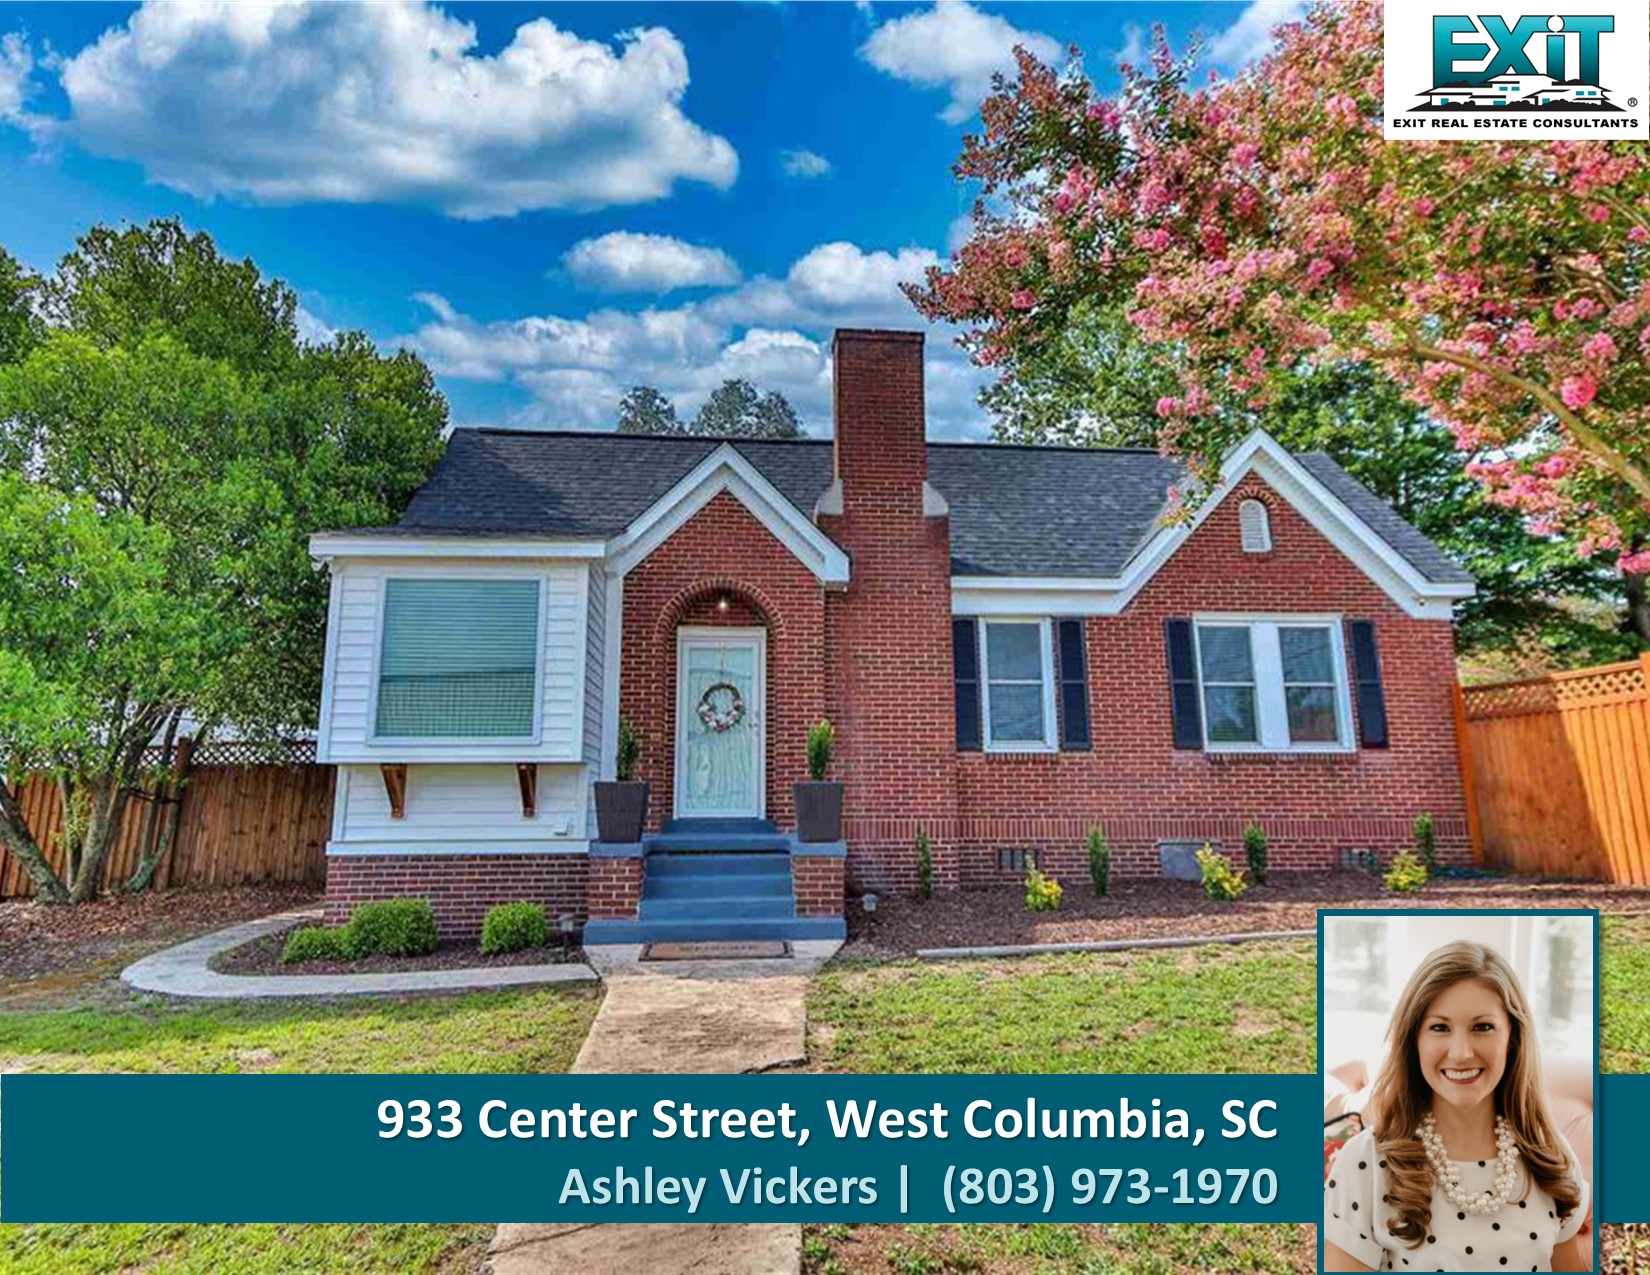 Just listed in The Avenues - West Columbia